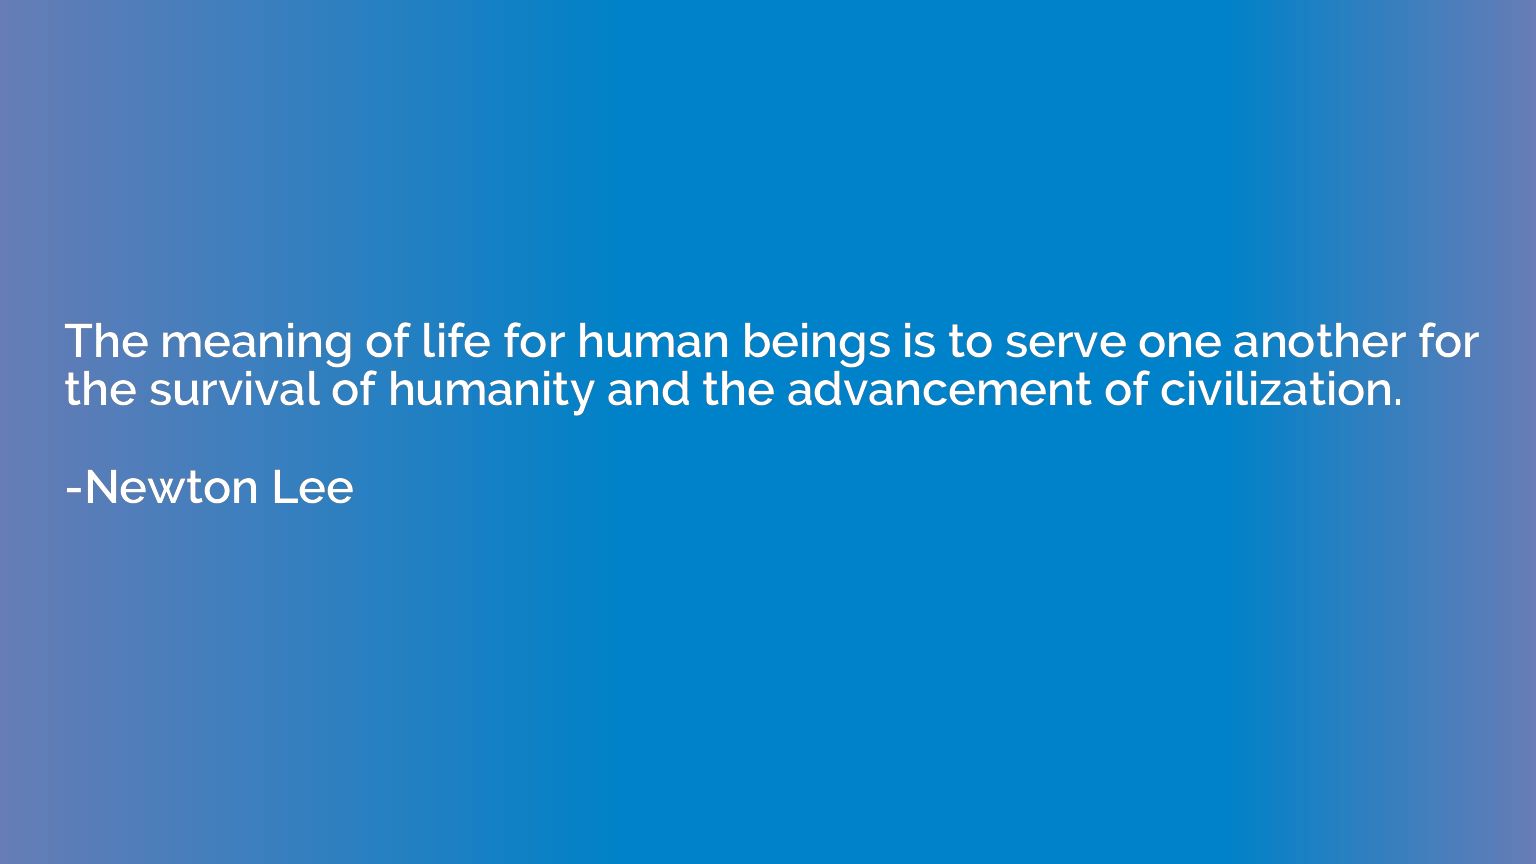 The meaning of life for human beings is to serve one another